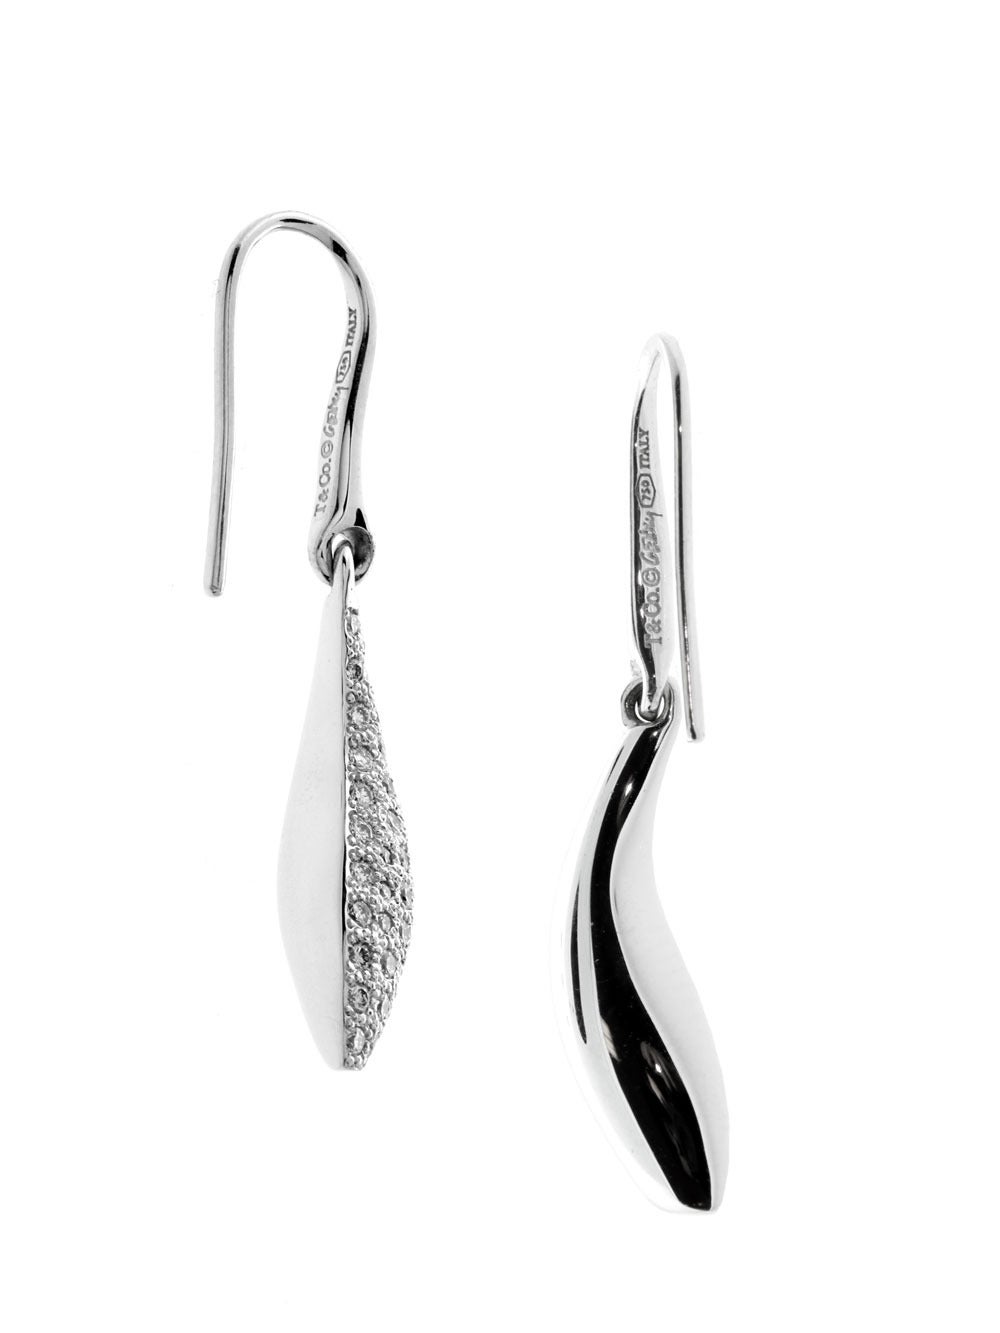 Graceful and flowing, evoking images of oceanic beauty, the Fish earrings by Tiffany & Co epitomize subtle glamour. Sculpted in smooth, glossy white gold and encrusted with .84 cts of round cut brilliant Vs1 F-G color diamonds, the clarity and